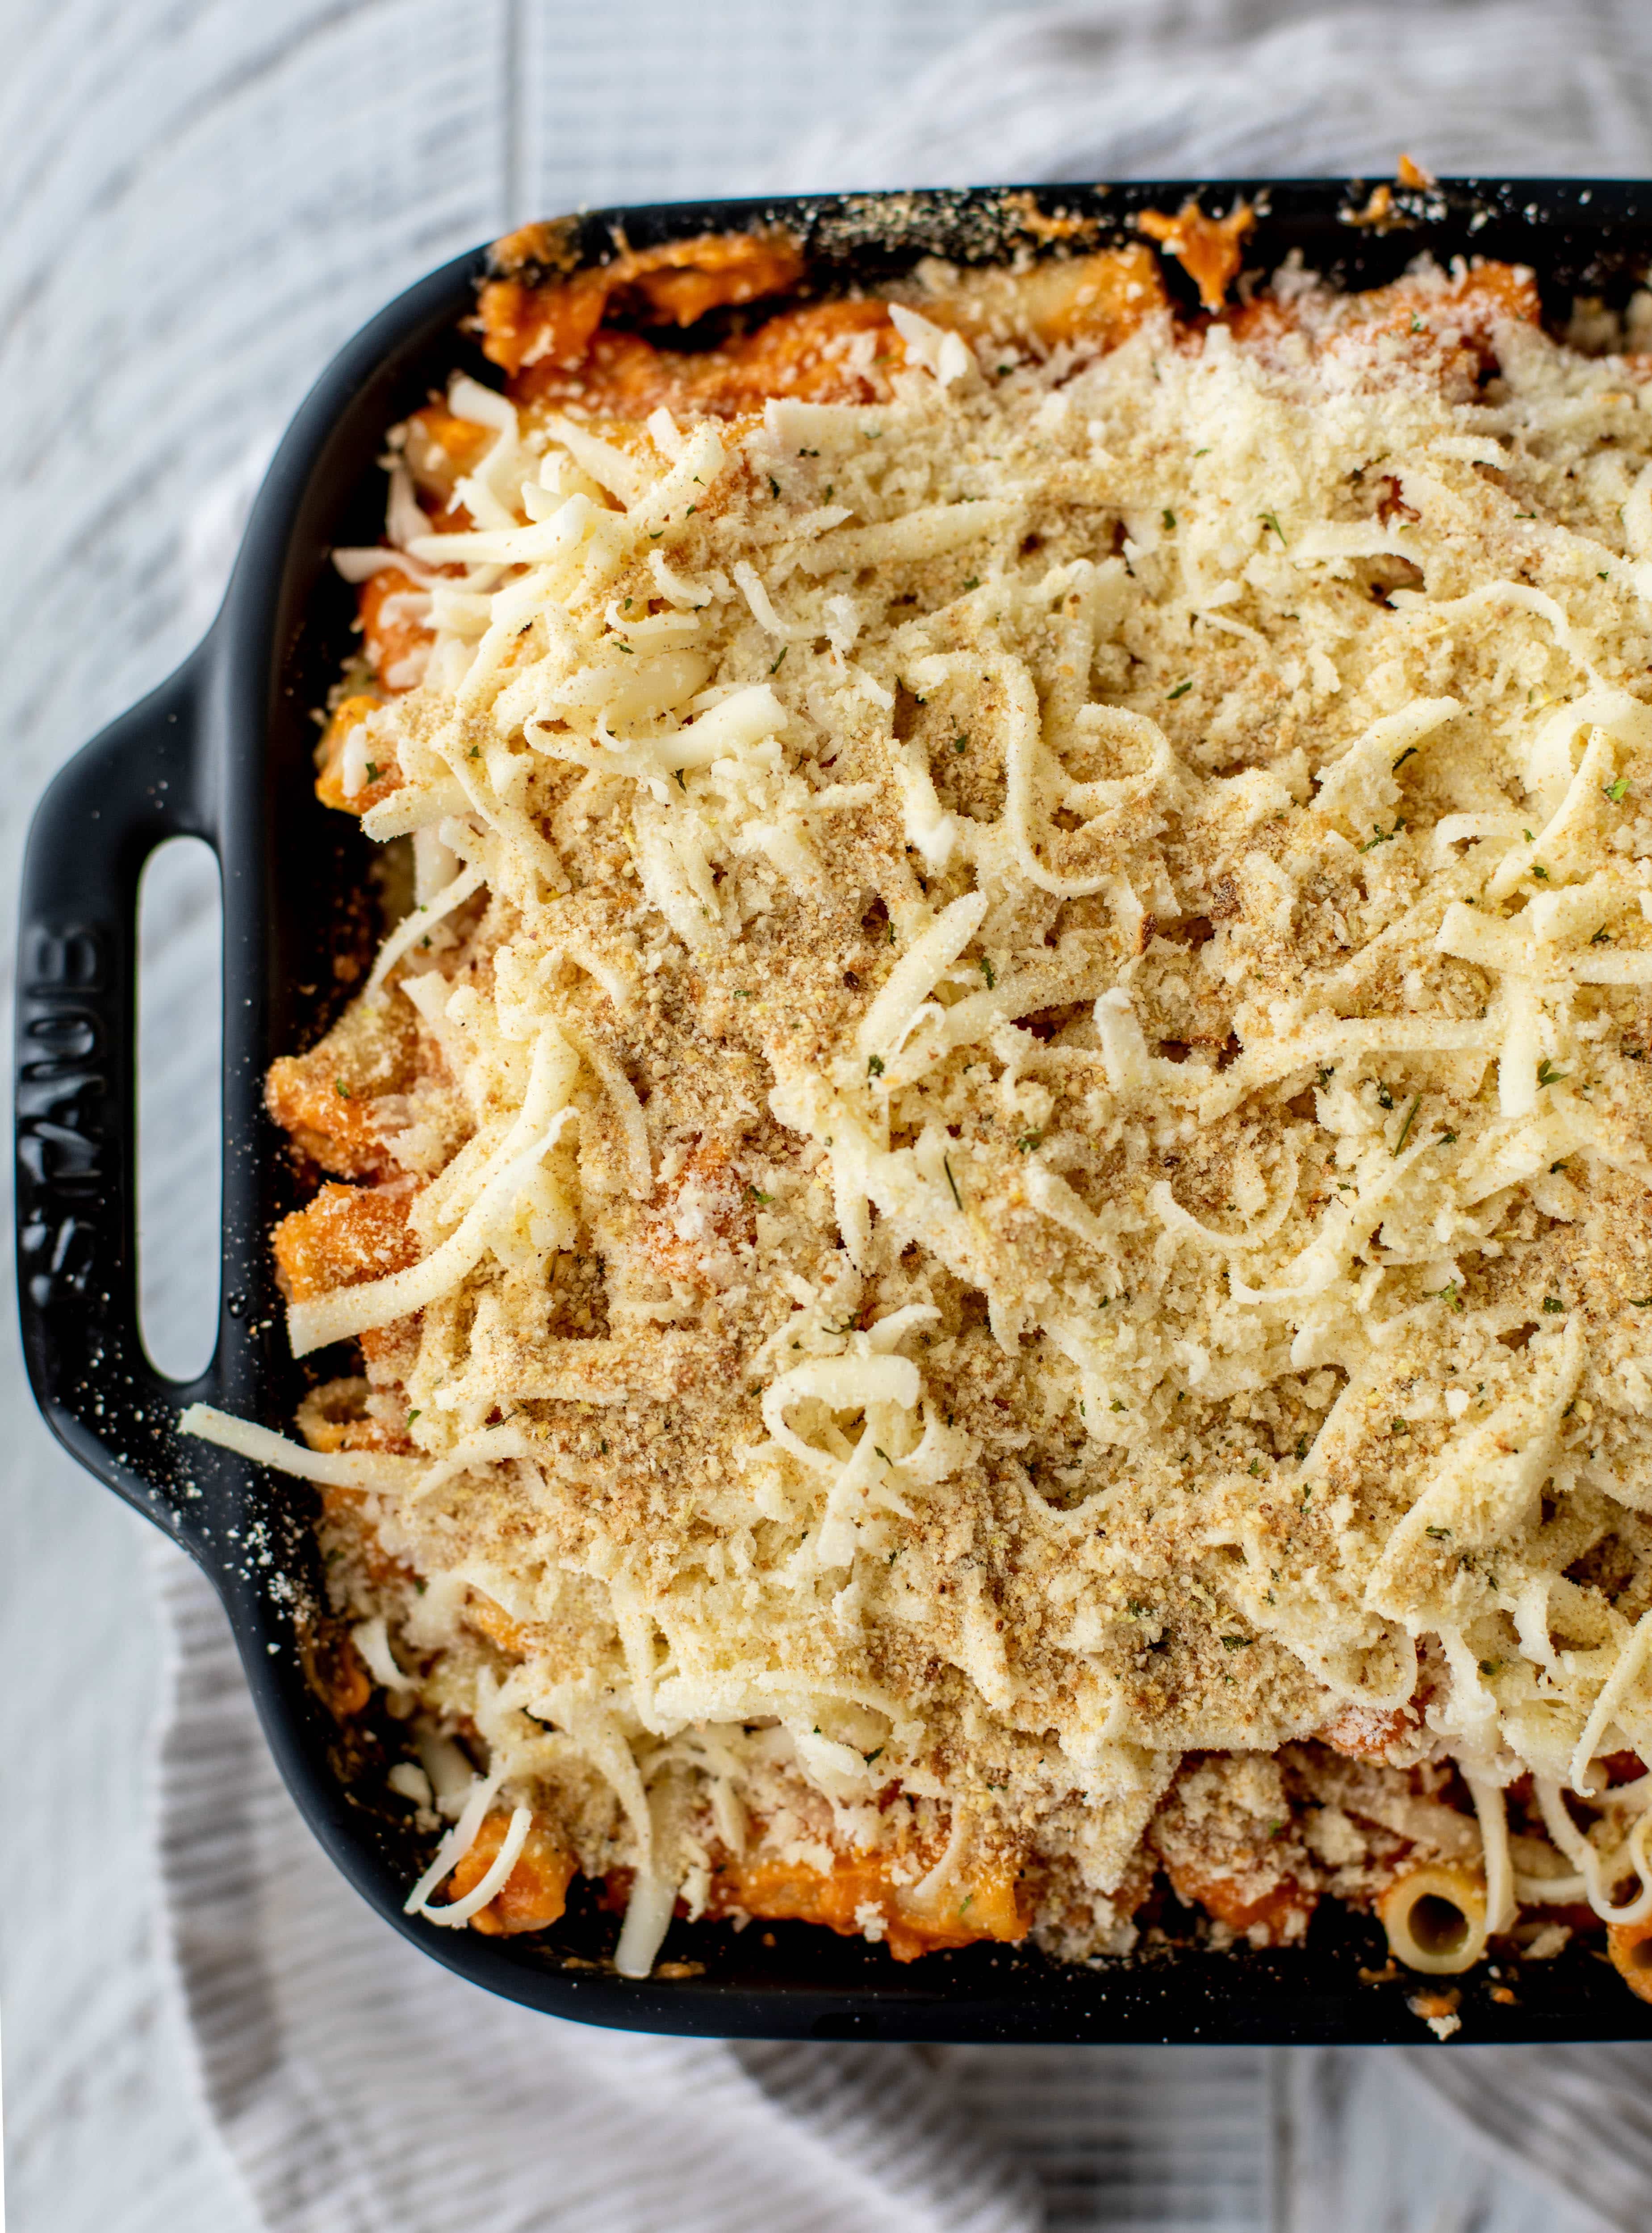 Butternut squash baked ziti is the ultimate comfort food! Squash, fire roasted tomatoes, parmesan and mozzarella make the best sauce ever.